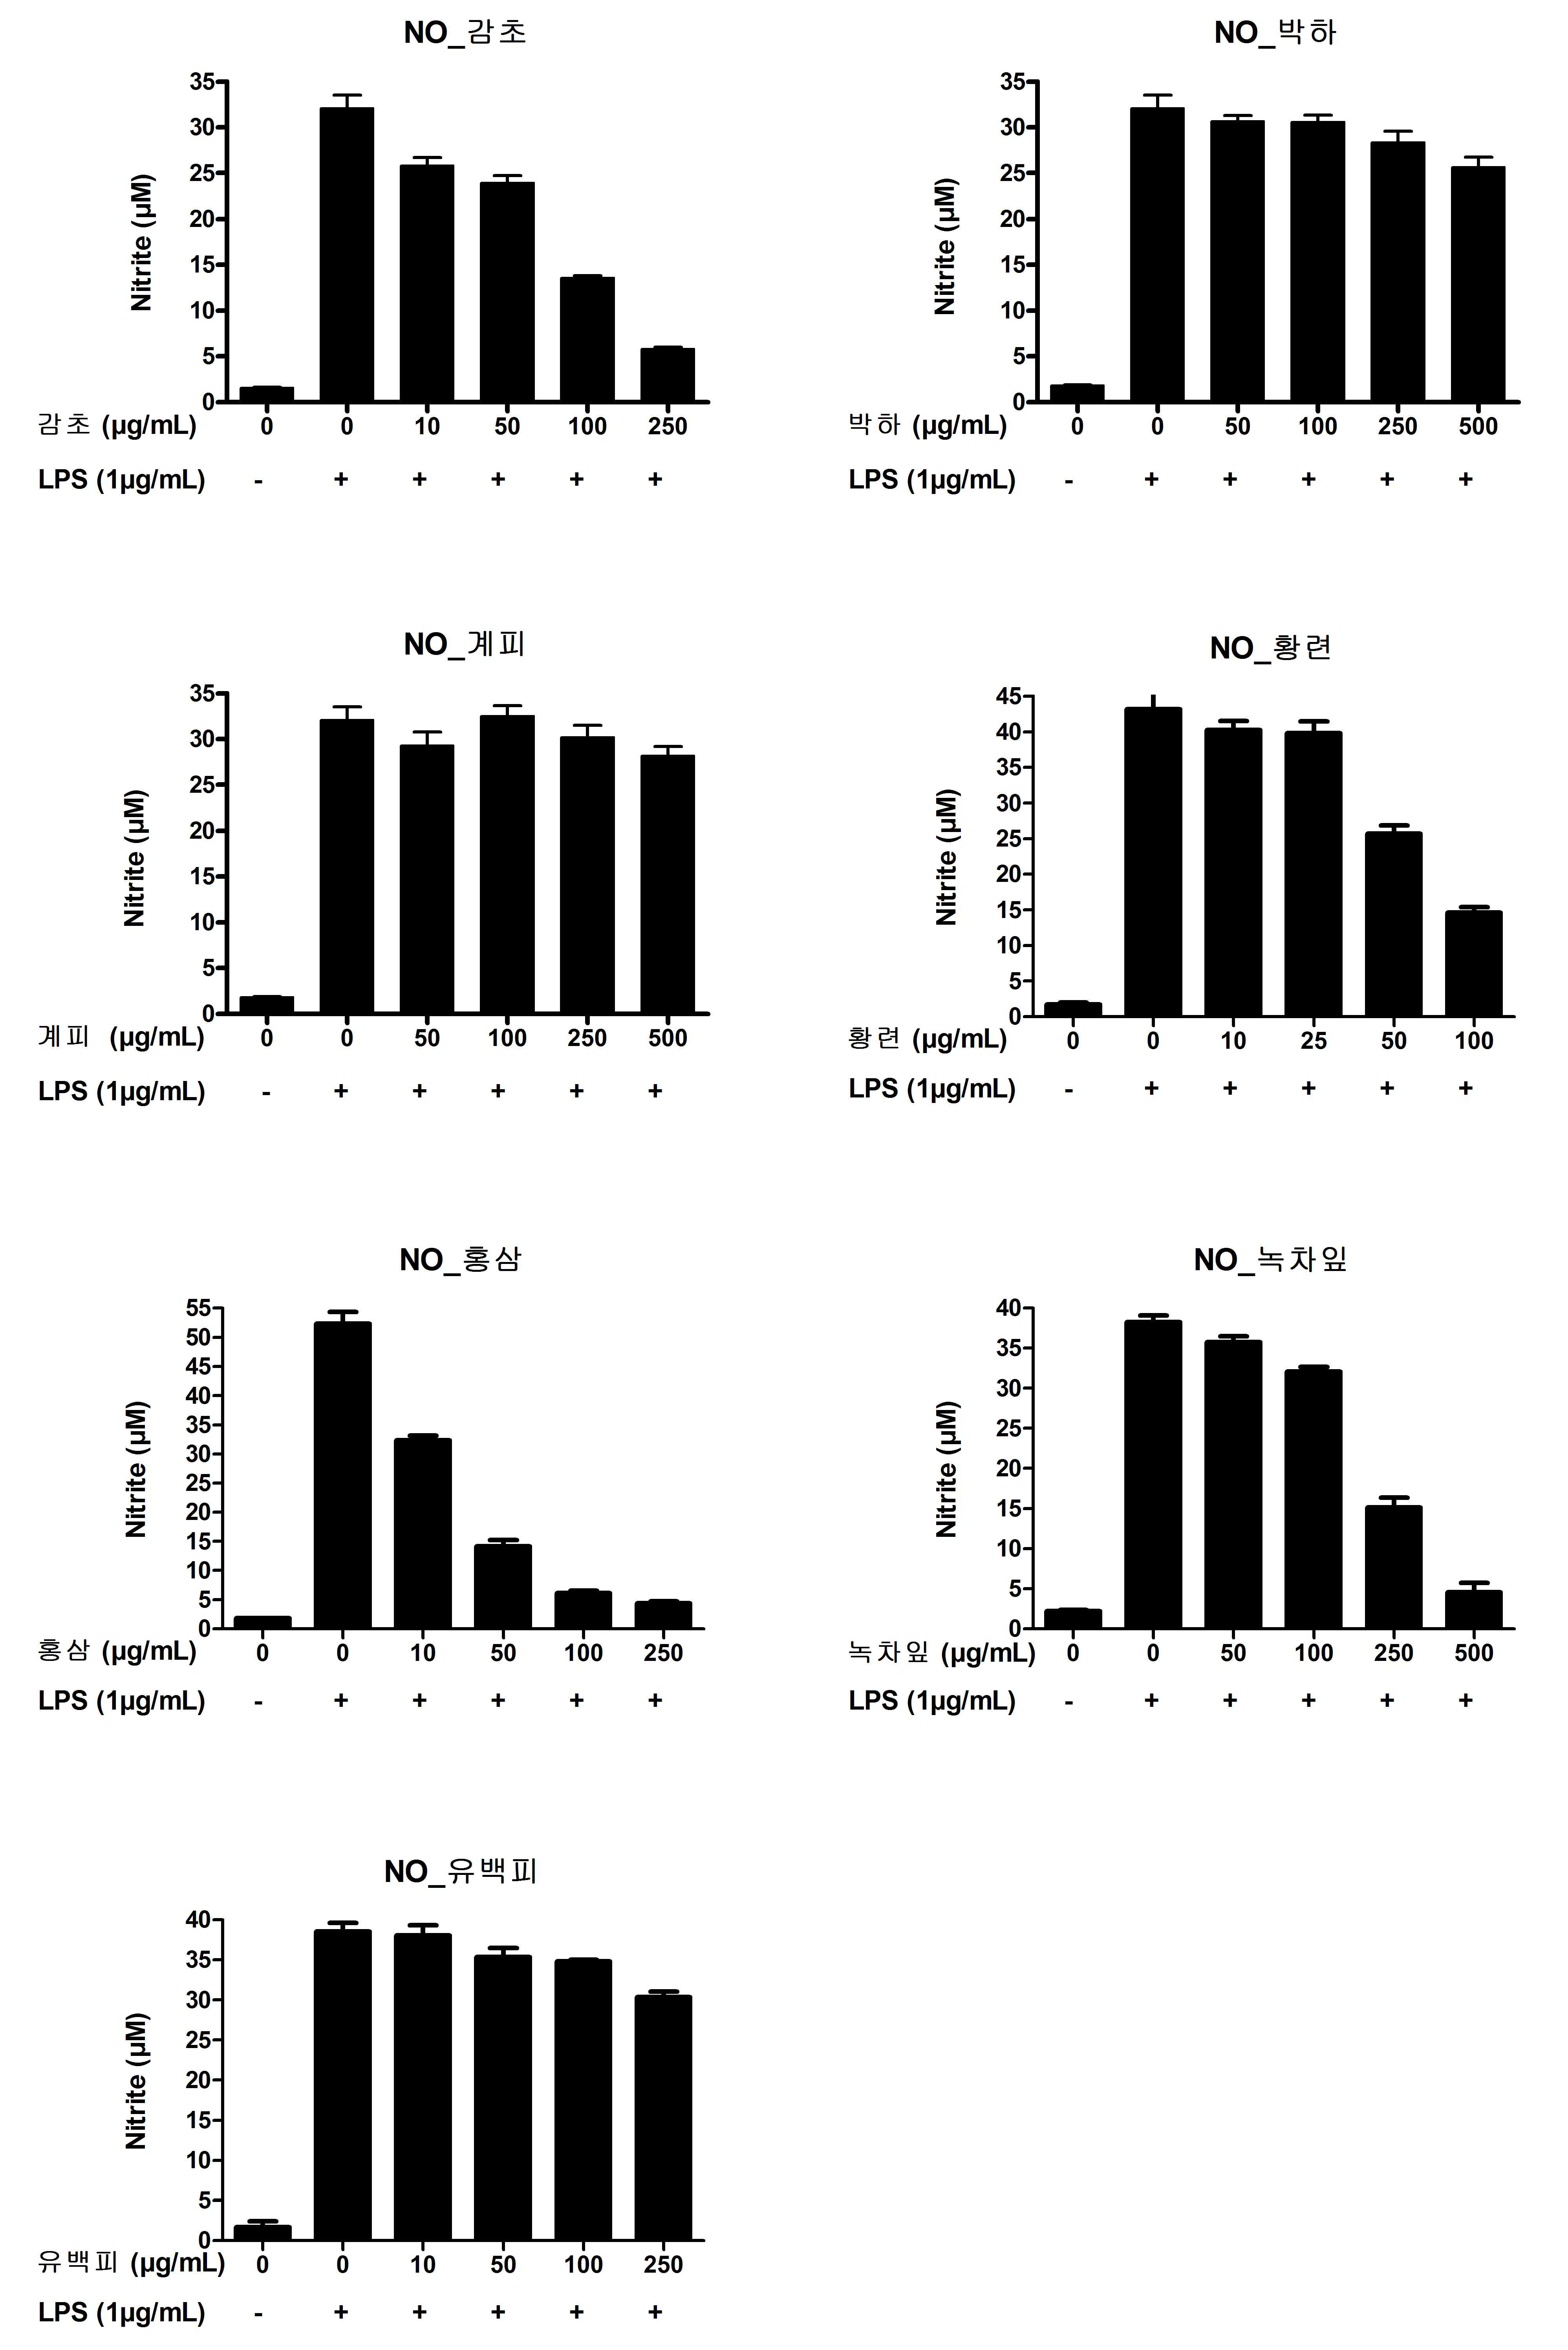 Effect of 7 herb extracts on LPS-induced Nitric Oxide production in RAW 264.7 cells. Extracts were pre-treated on RAW 264.7 cells for 1 hr. Then we treated 1 μg/mL of LPS for 18 hrs. Nitric Oxide production was measured with Griess Reagent. Data were chosen from three independent triplicate experiments.